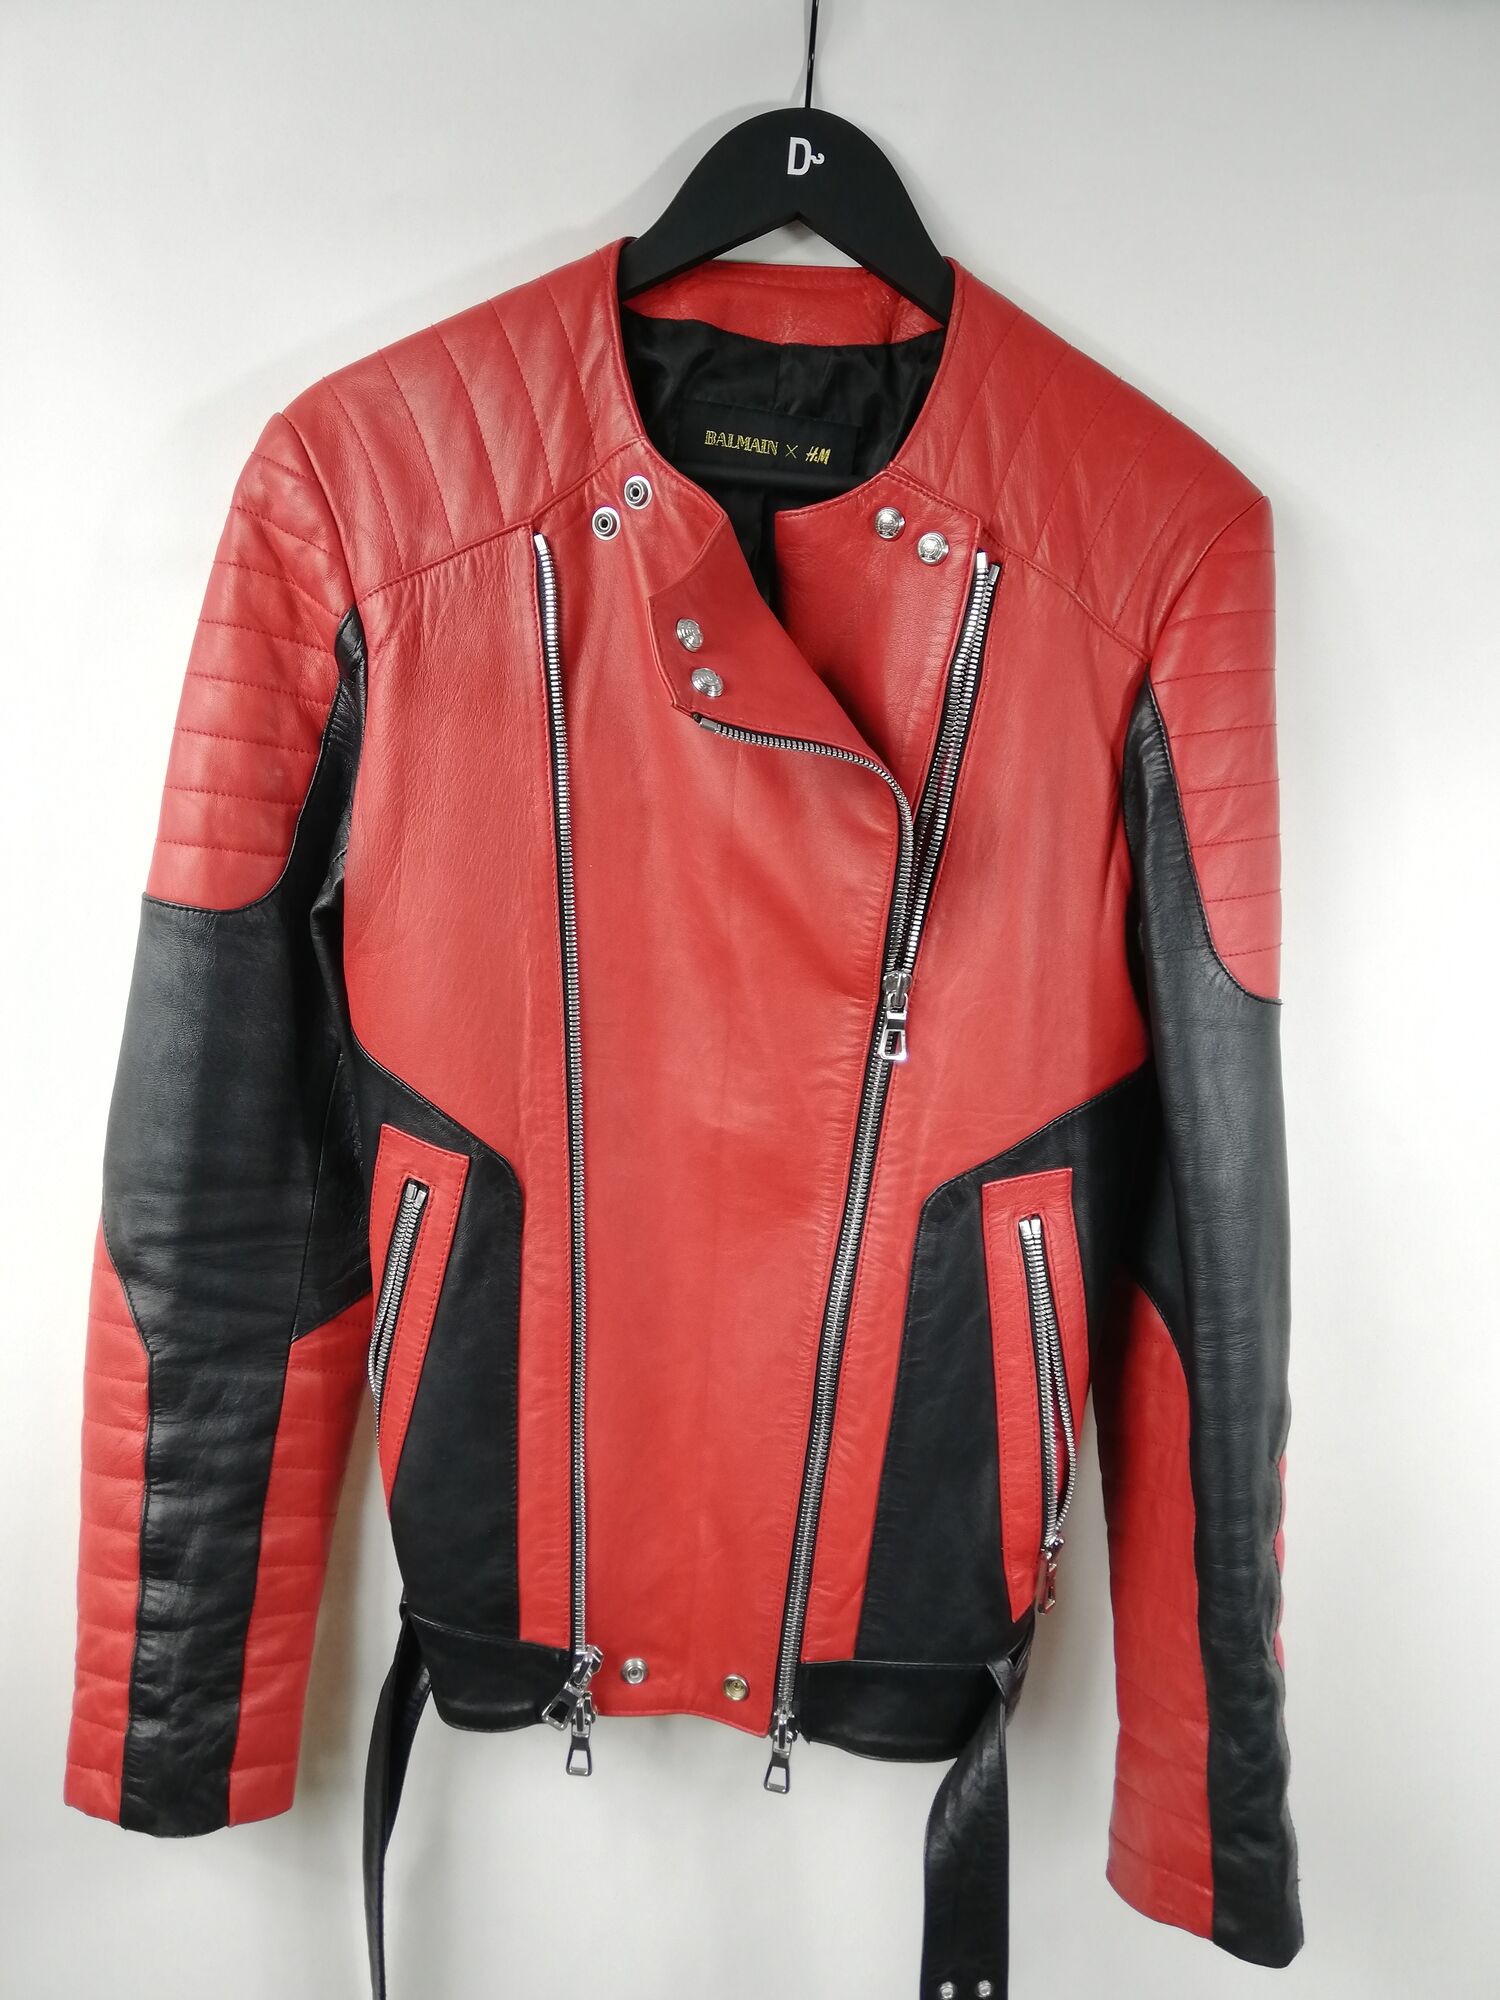 Leather Jacket Balmain x H&M - 50, buy pre-owned 170